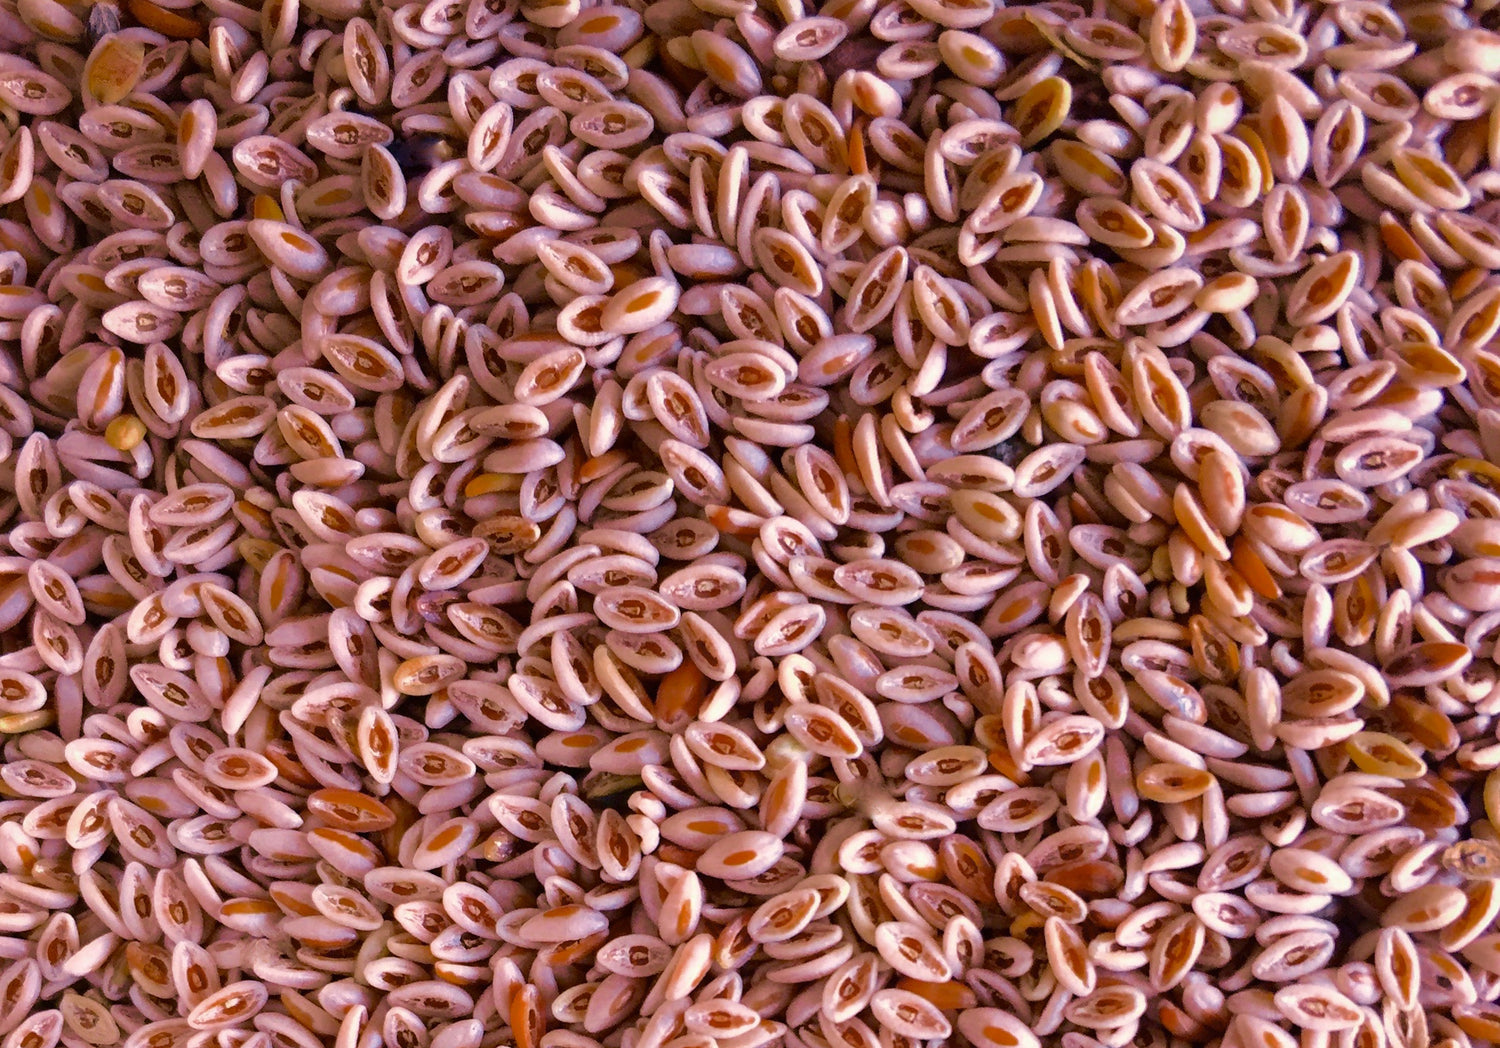 99% PURE PSYLLIUM SEEDS KAMAL AND SONS INDIA MANUFACTURERS, TRADERS AND SUPPLIERS OF PREMIUM QUALITY PSYLLIUM PRODUCTS, SPICES SEEDS AND INDIAN RAW PRODUCTS